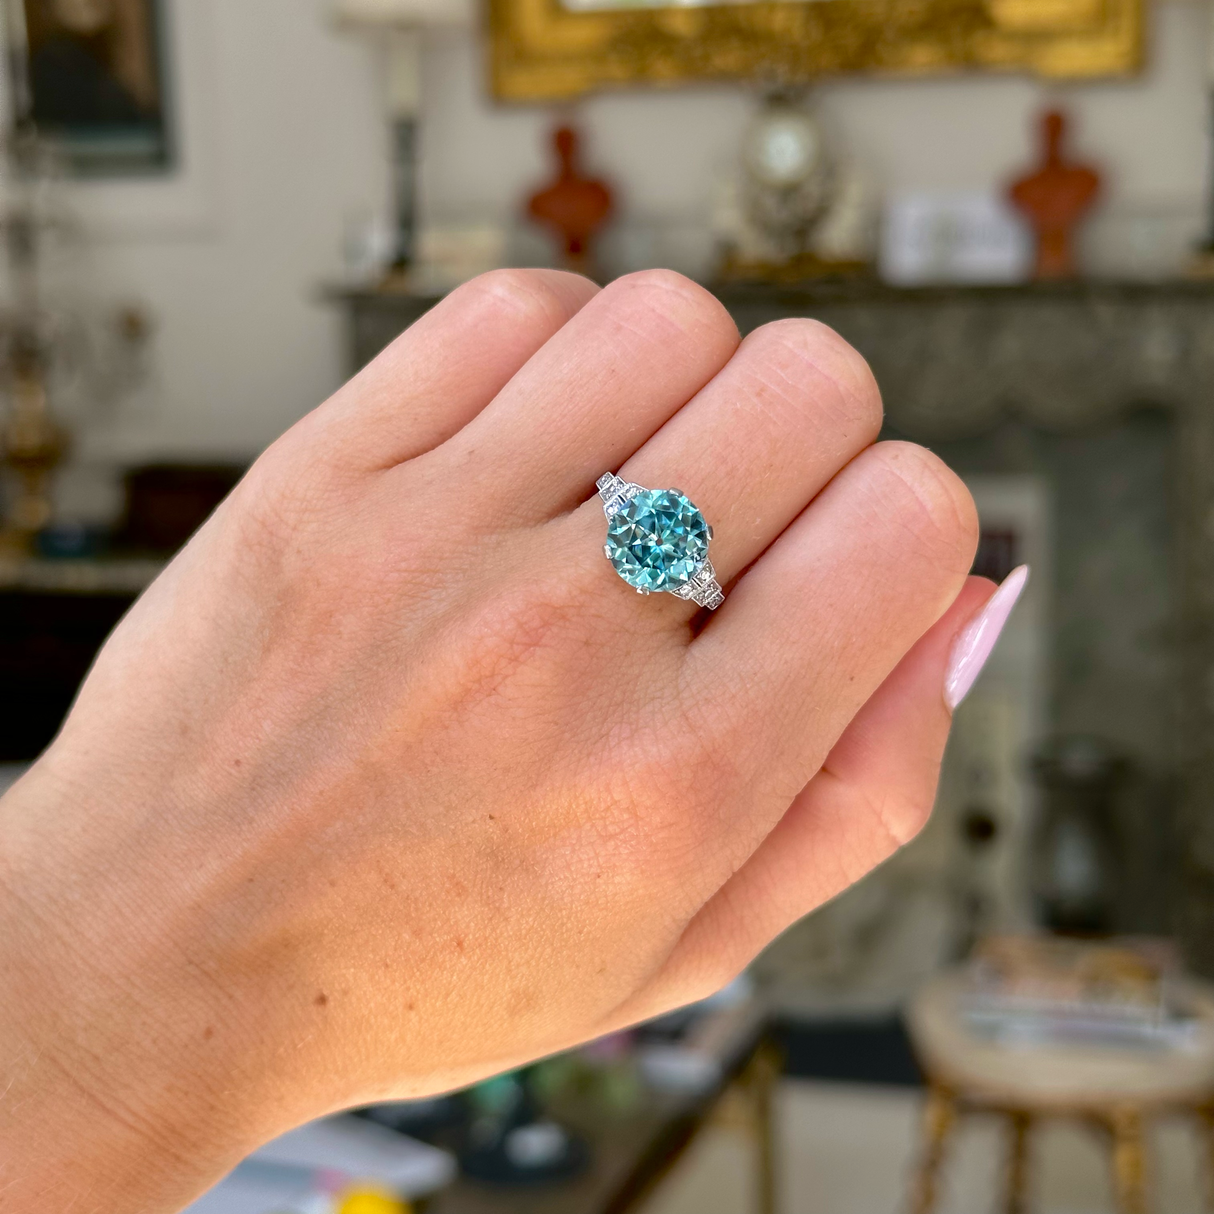 Art deco blue zircon and diamond ring, worn on closed hand, front view. 